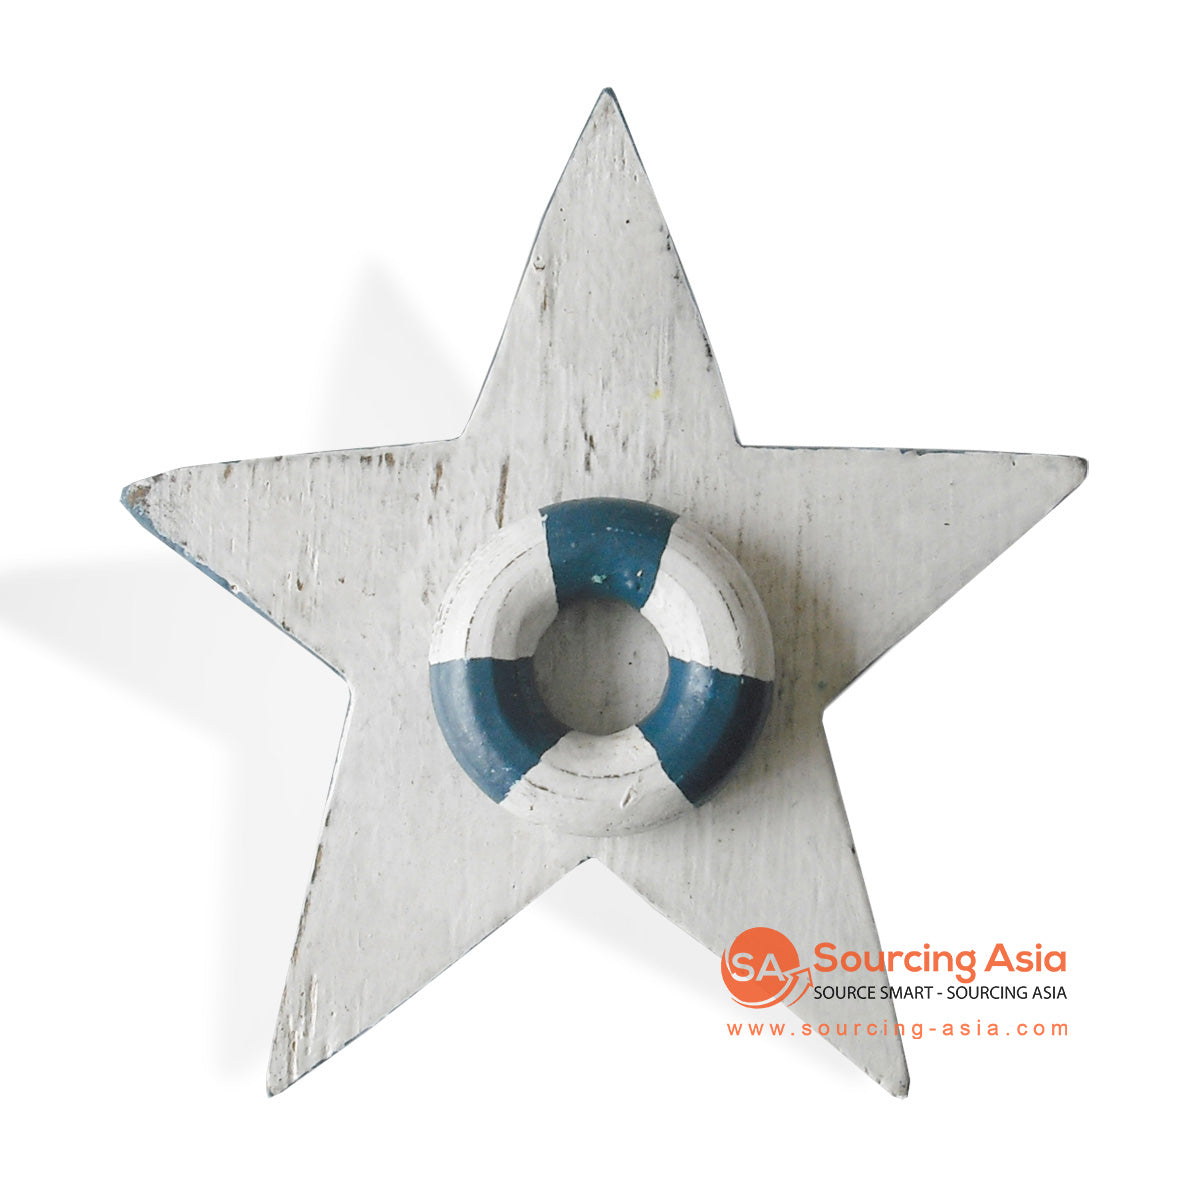 MDC82 WOODEN STAR HANGING DECORATION WITH BUOY ORNAMENT